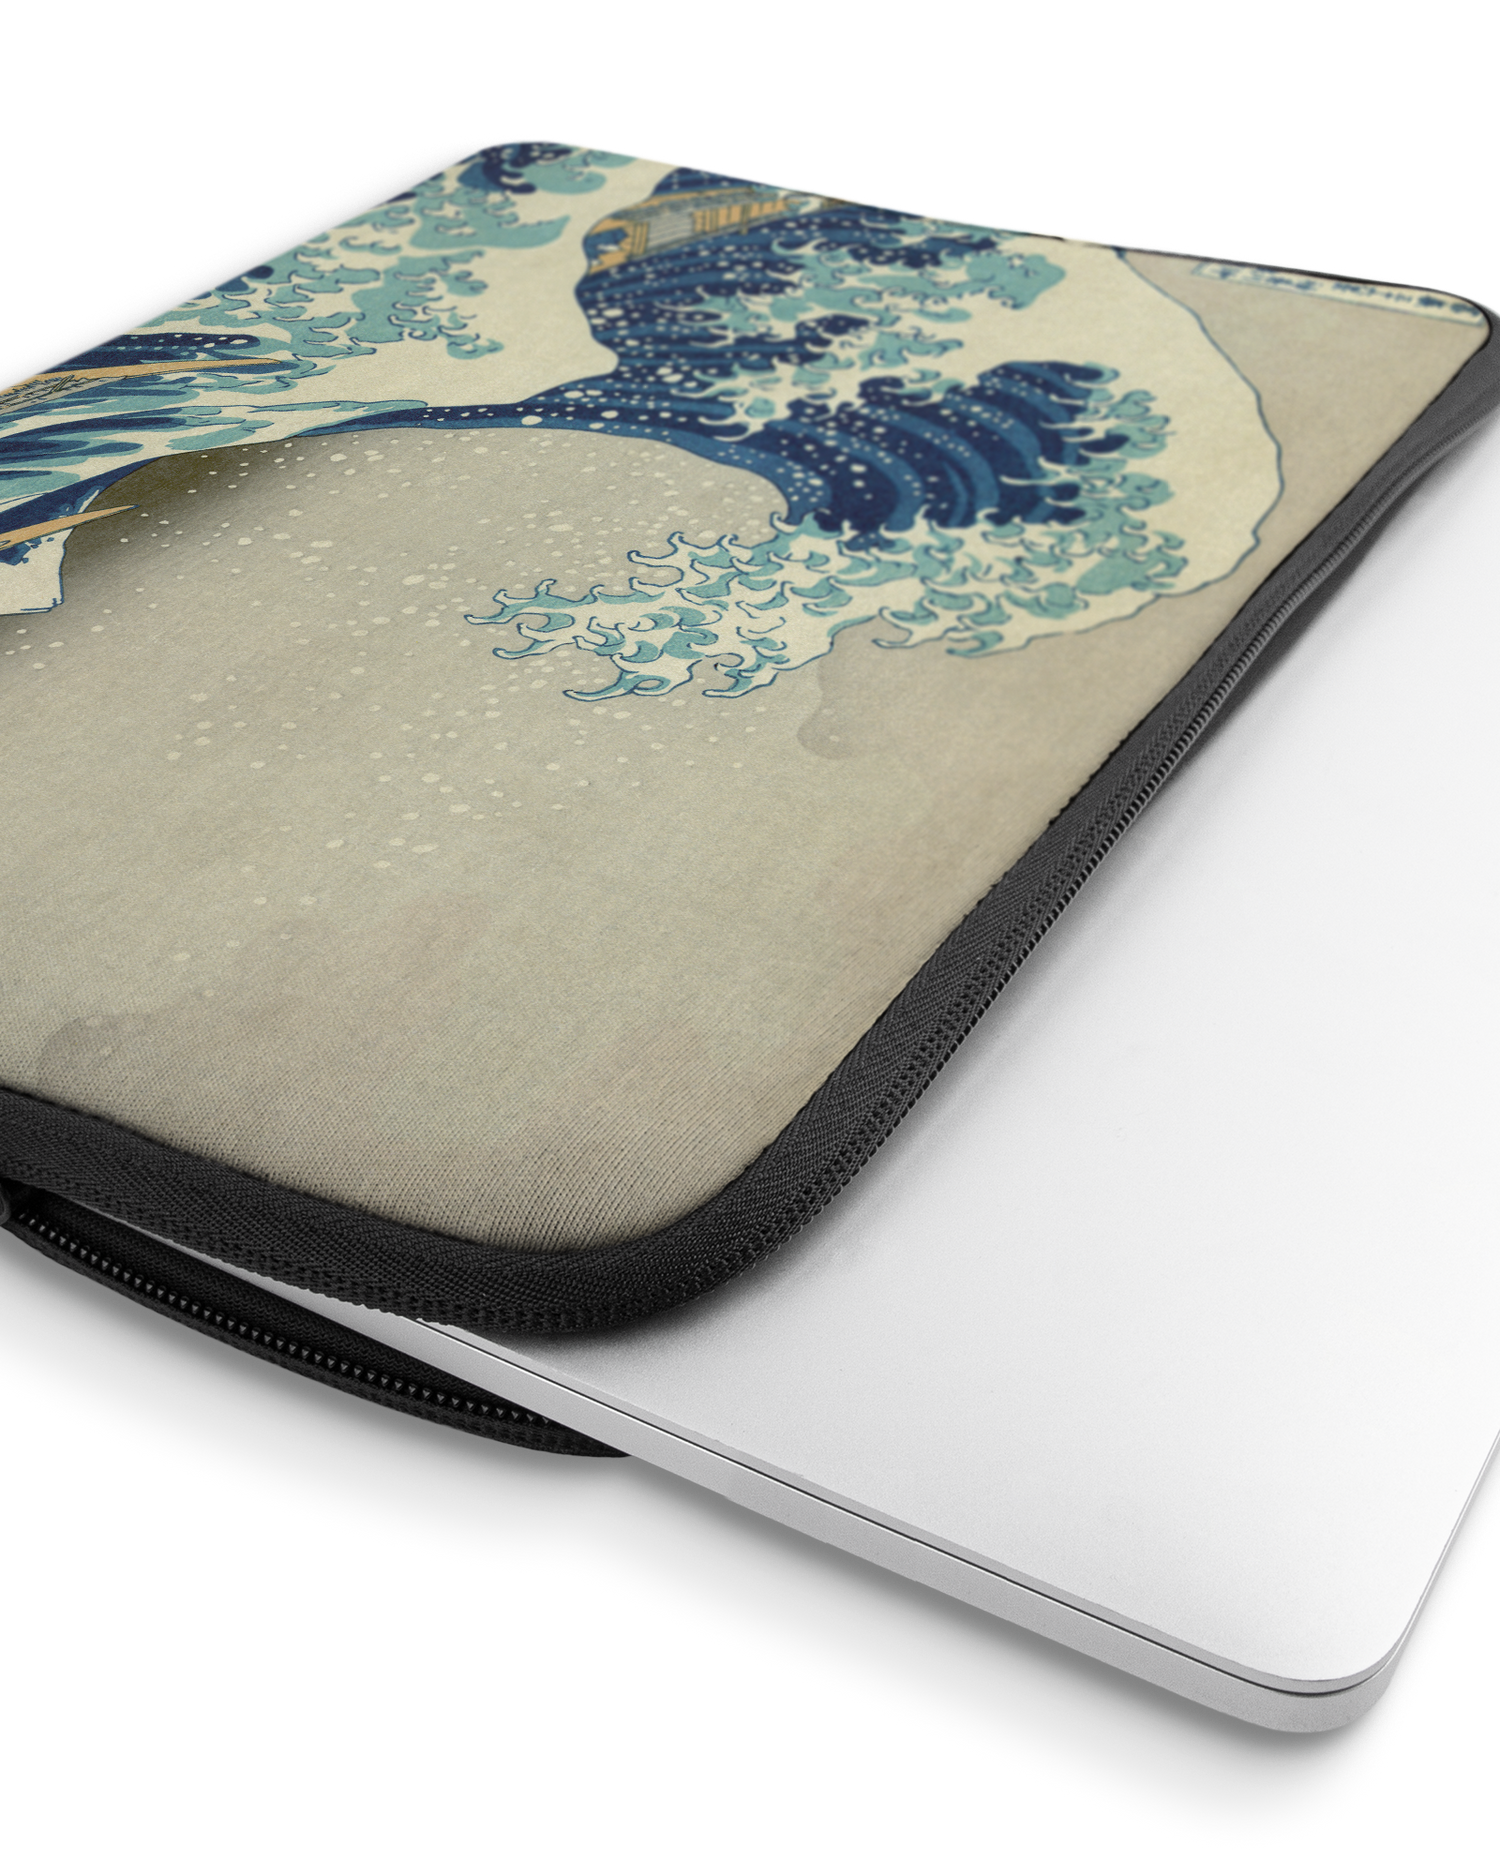 Great Wave Off Kanagawa By Hokusai Laptop Case 16 inch with device inside